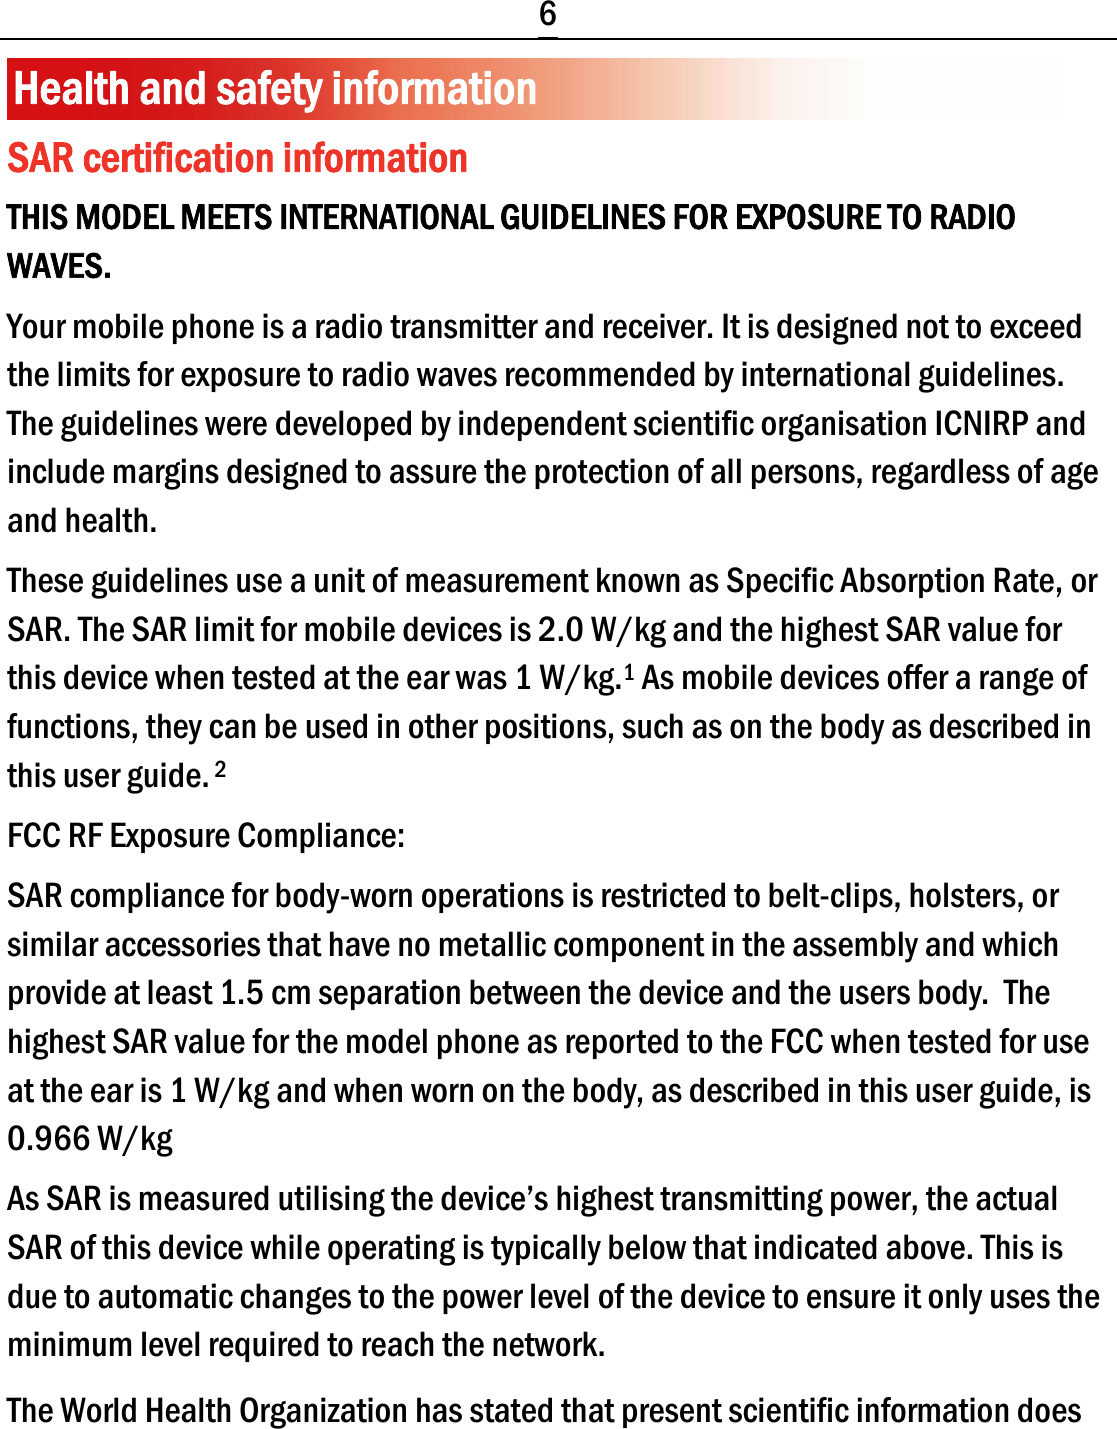  6 Health and safety information SAR certification information THIS MODEL MEETS INTERNATIONAL GUIDELINES FOR EXPOSURE TO RADIO WAVES. Your mobile phone is a radio transmitter and receiver. It is designed not to exceed the limits for exposure to radio waves recommended by international guidelines. The guidelines were developed by independent scientific organisation ICNIRP and include margins designed to assure the protection of all persons, regardless of age and health. These guidelines use a unit of measurement known as Specific Absorption Rate, or SAR. The SAR limit for mobile devices is 2.0 W/kg and the highest SAR value for this device when tested at the ear was 1 W/kg.1 As mobile devices offer a range of functions, they can be used in other positions, such as on the body as described in this user guide. 2 FCC RF Exposure Compliance:   SAR compliance for body-worn operations is restricted to belt-clips, holsters, or similar accessories that have no metallic component in the assembly and which provide at least 1.5 cm separation between the device and the users body. The highest SAR value for the model phone as reported to the FCC when tested for use at the ear is 1 W/kg and when worn on the body, as described in this user guide, is 0.966 W/kg As SAR is measured utilising the device’s highest transmitting power, the actual SAR of this device while operating is typically below that indicated above. This is due to automatic changes to the power level of the device to ensure it only uses the minimum level required to reach the network. The World Health Organization has stated that present scientific information does 